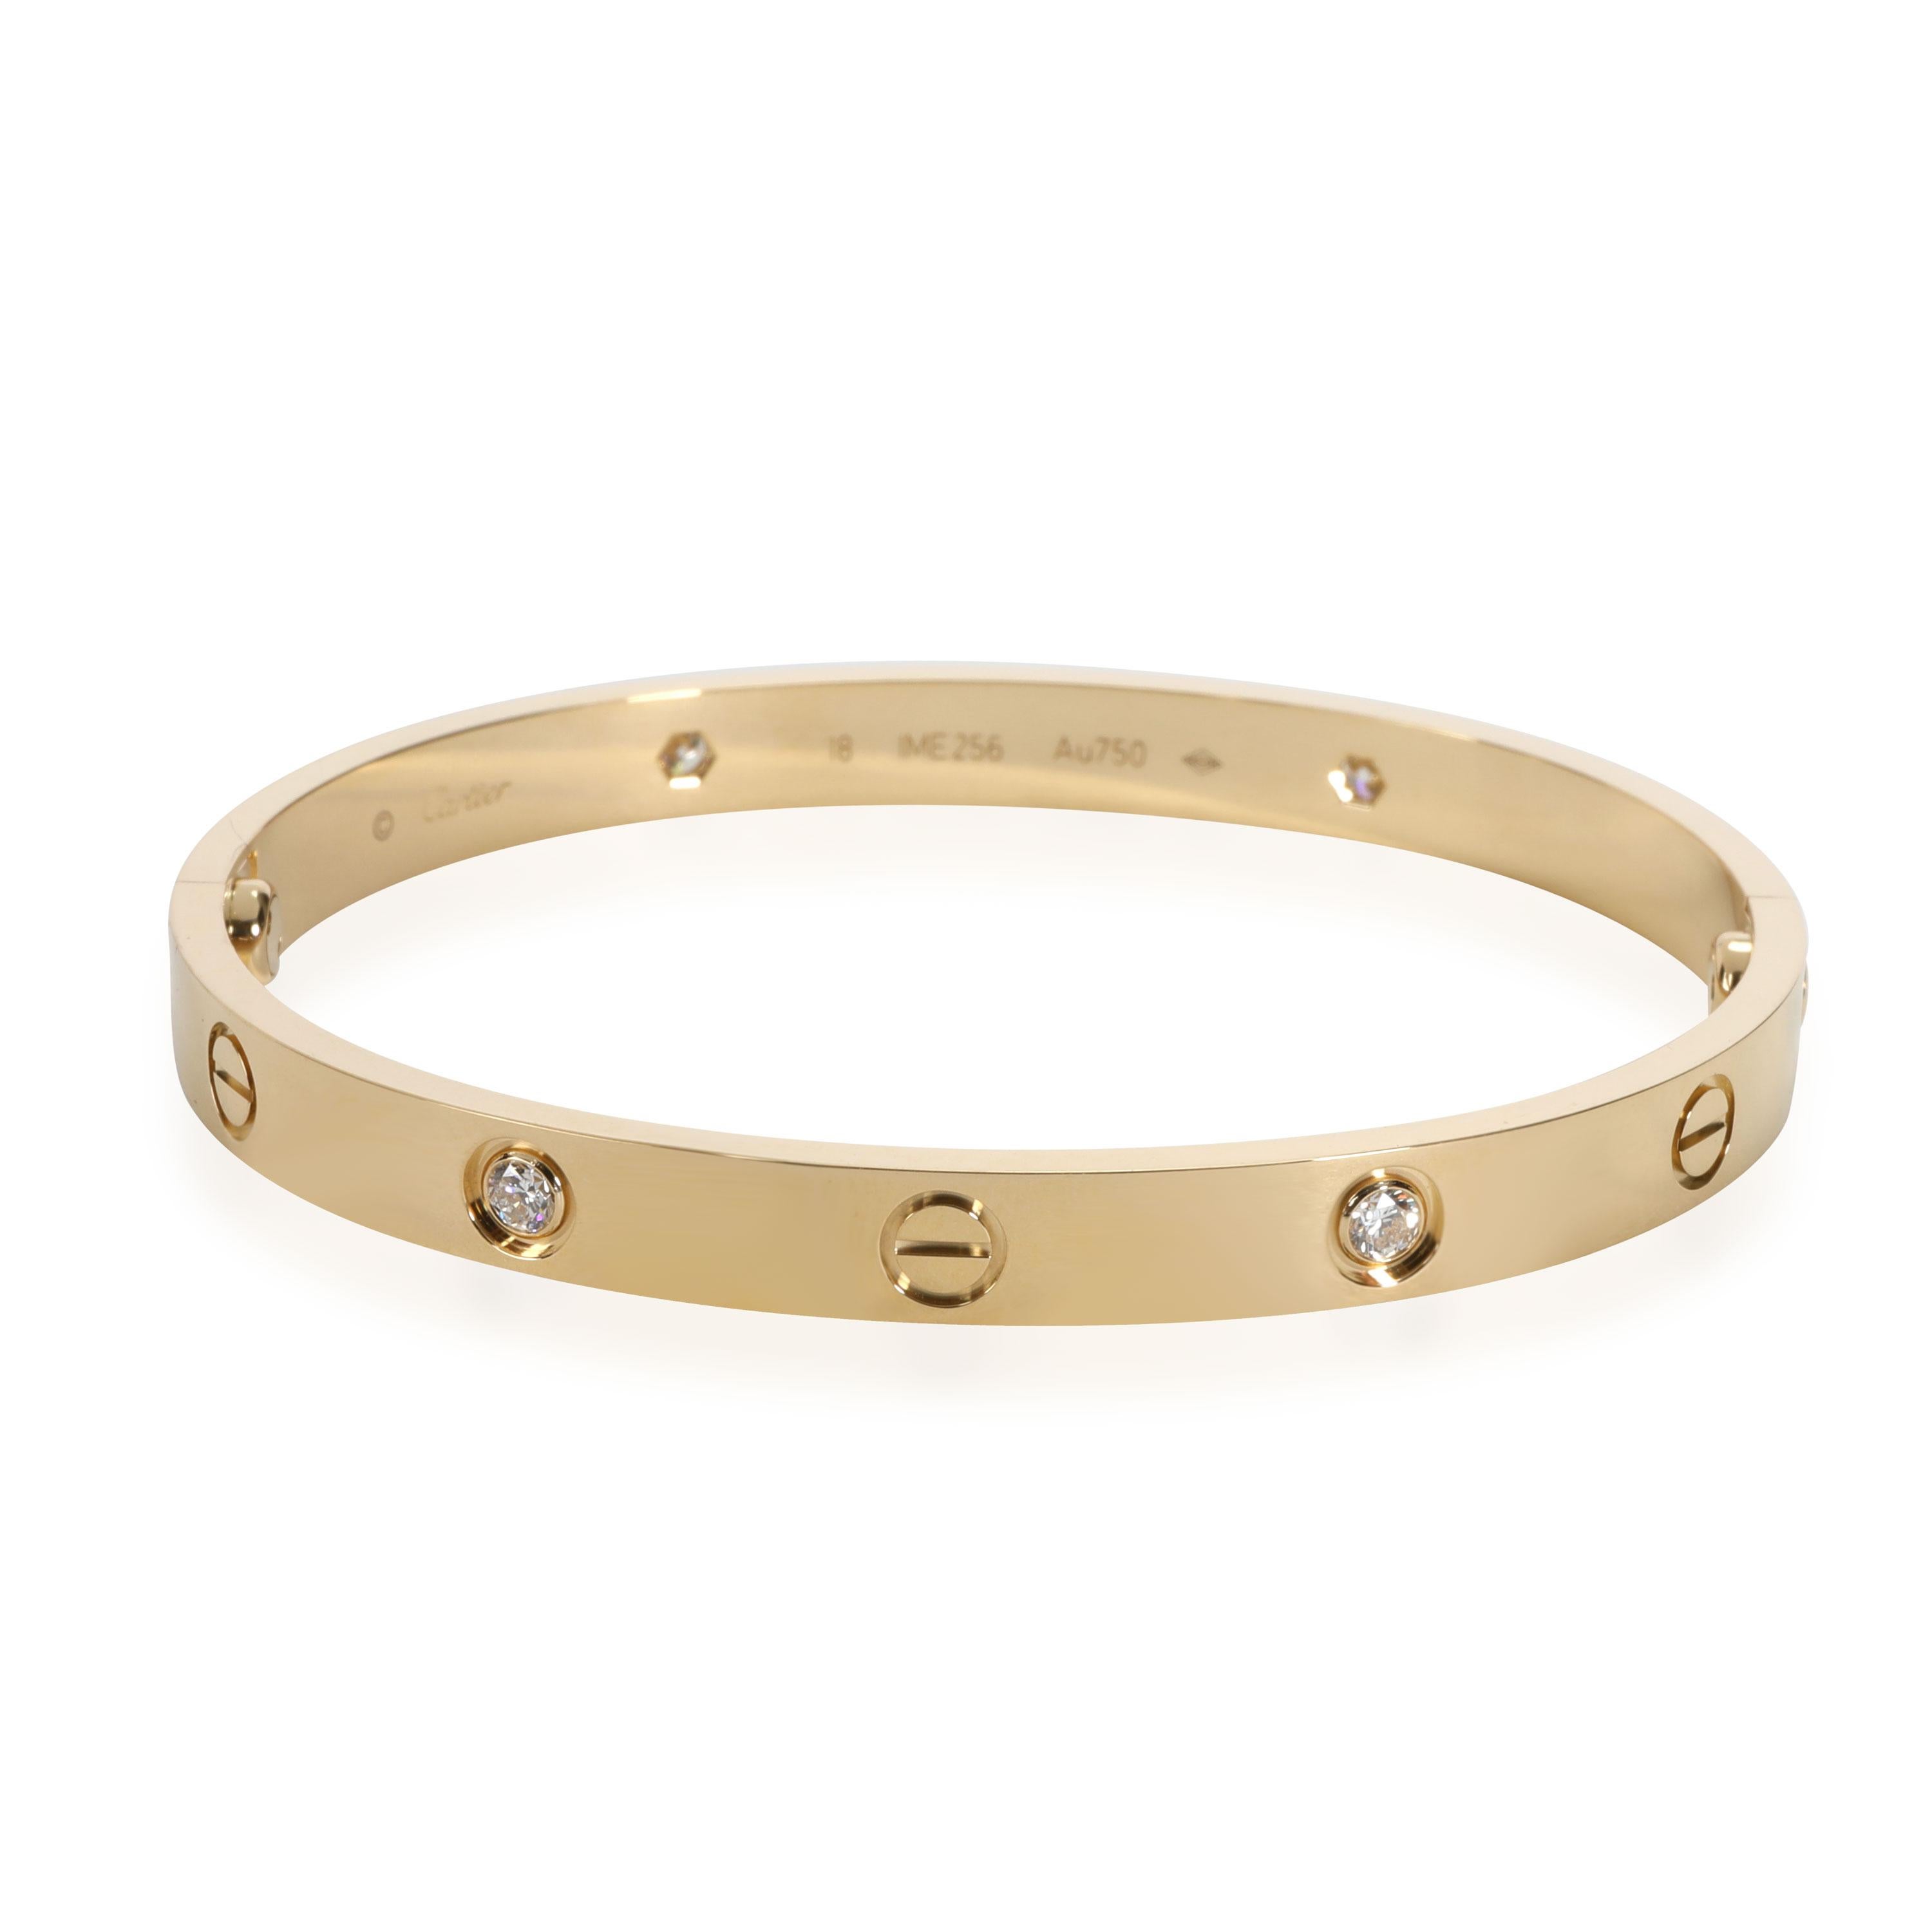 Cartier Diamond Love Bracelet in 18K Yellow Gold 0.42 CTW

PRIMARY DETAILS
SKU: 110892
Listing Title: Cartier Diamond Love Bracelet in 18K Yellow Gold 0.42 CTW
Condition Description: Retails for 11,100 USD. In excellent condition and recently